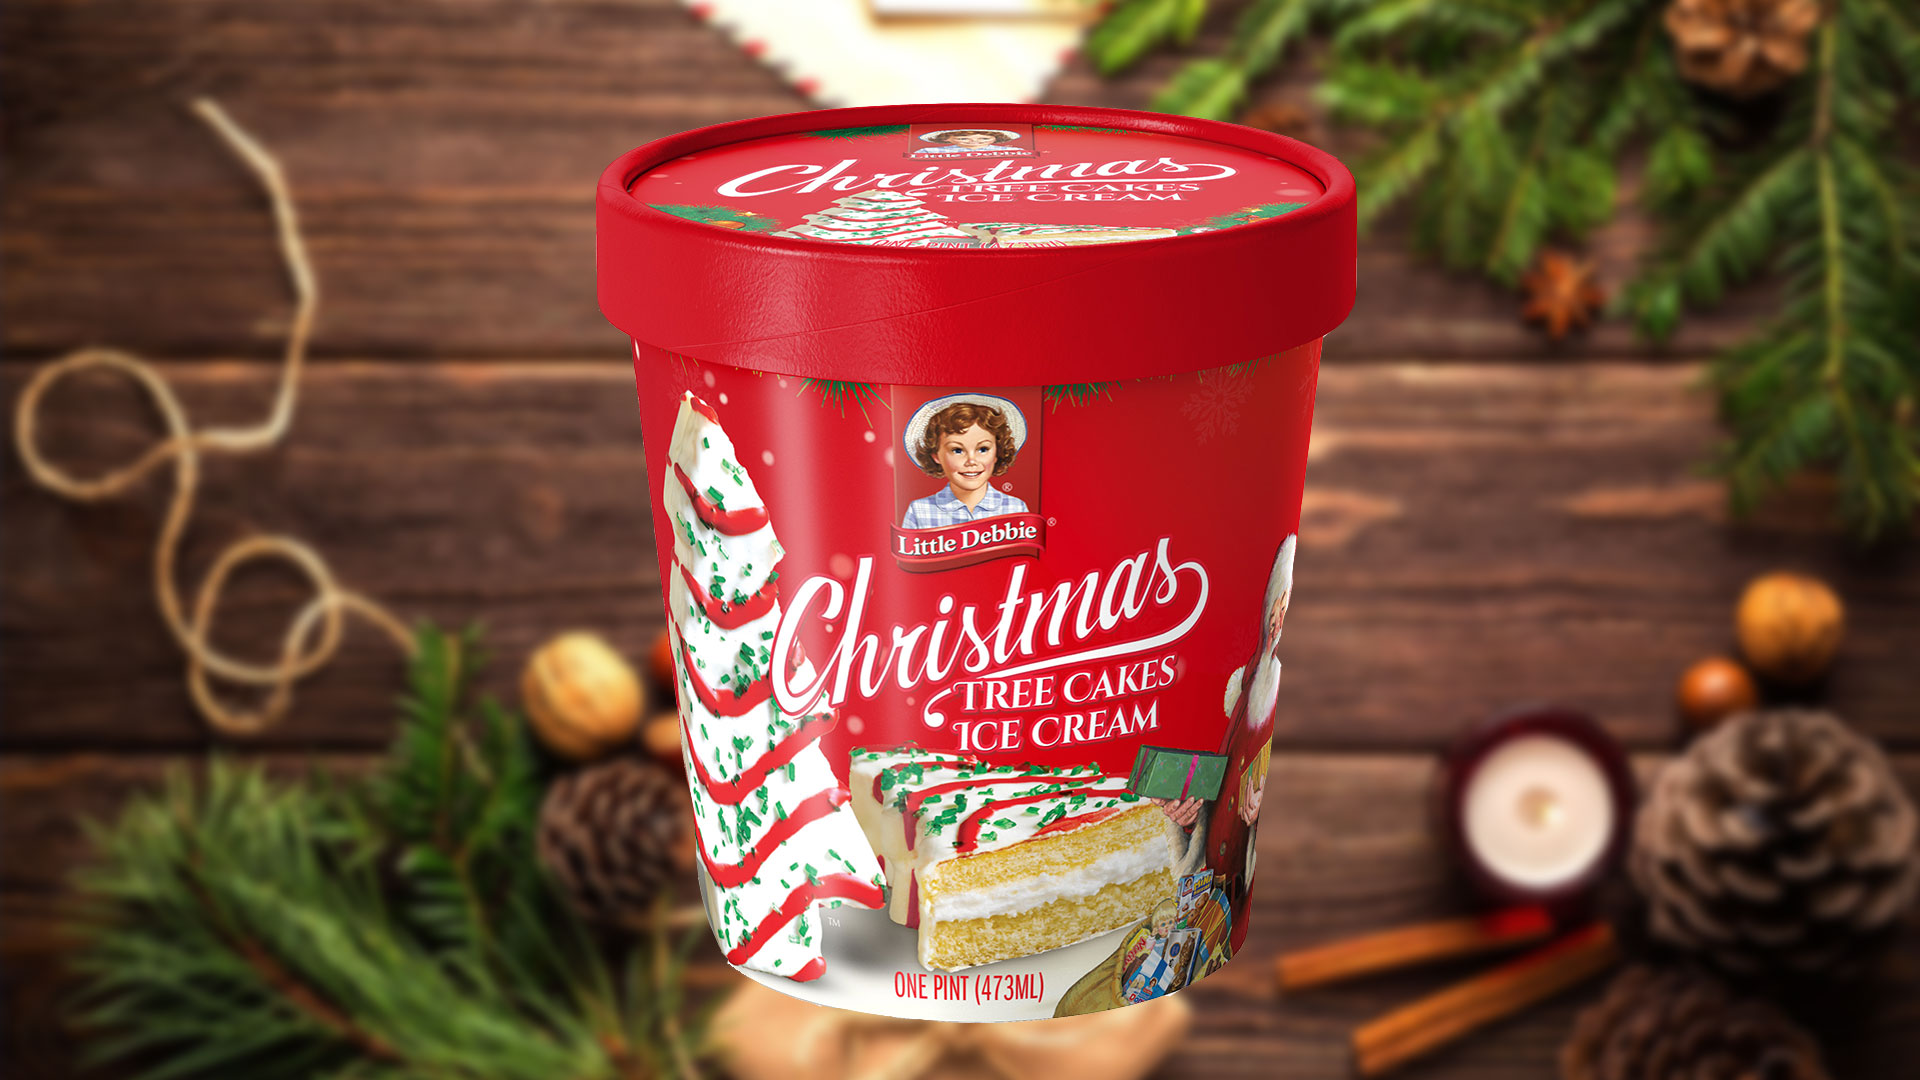 Little Debbie Christmas Tree Cakes ice cream flavor to debut this holiday season